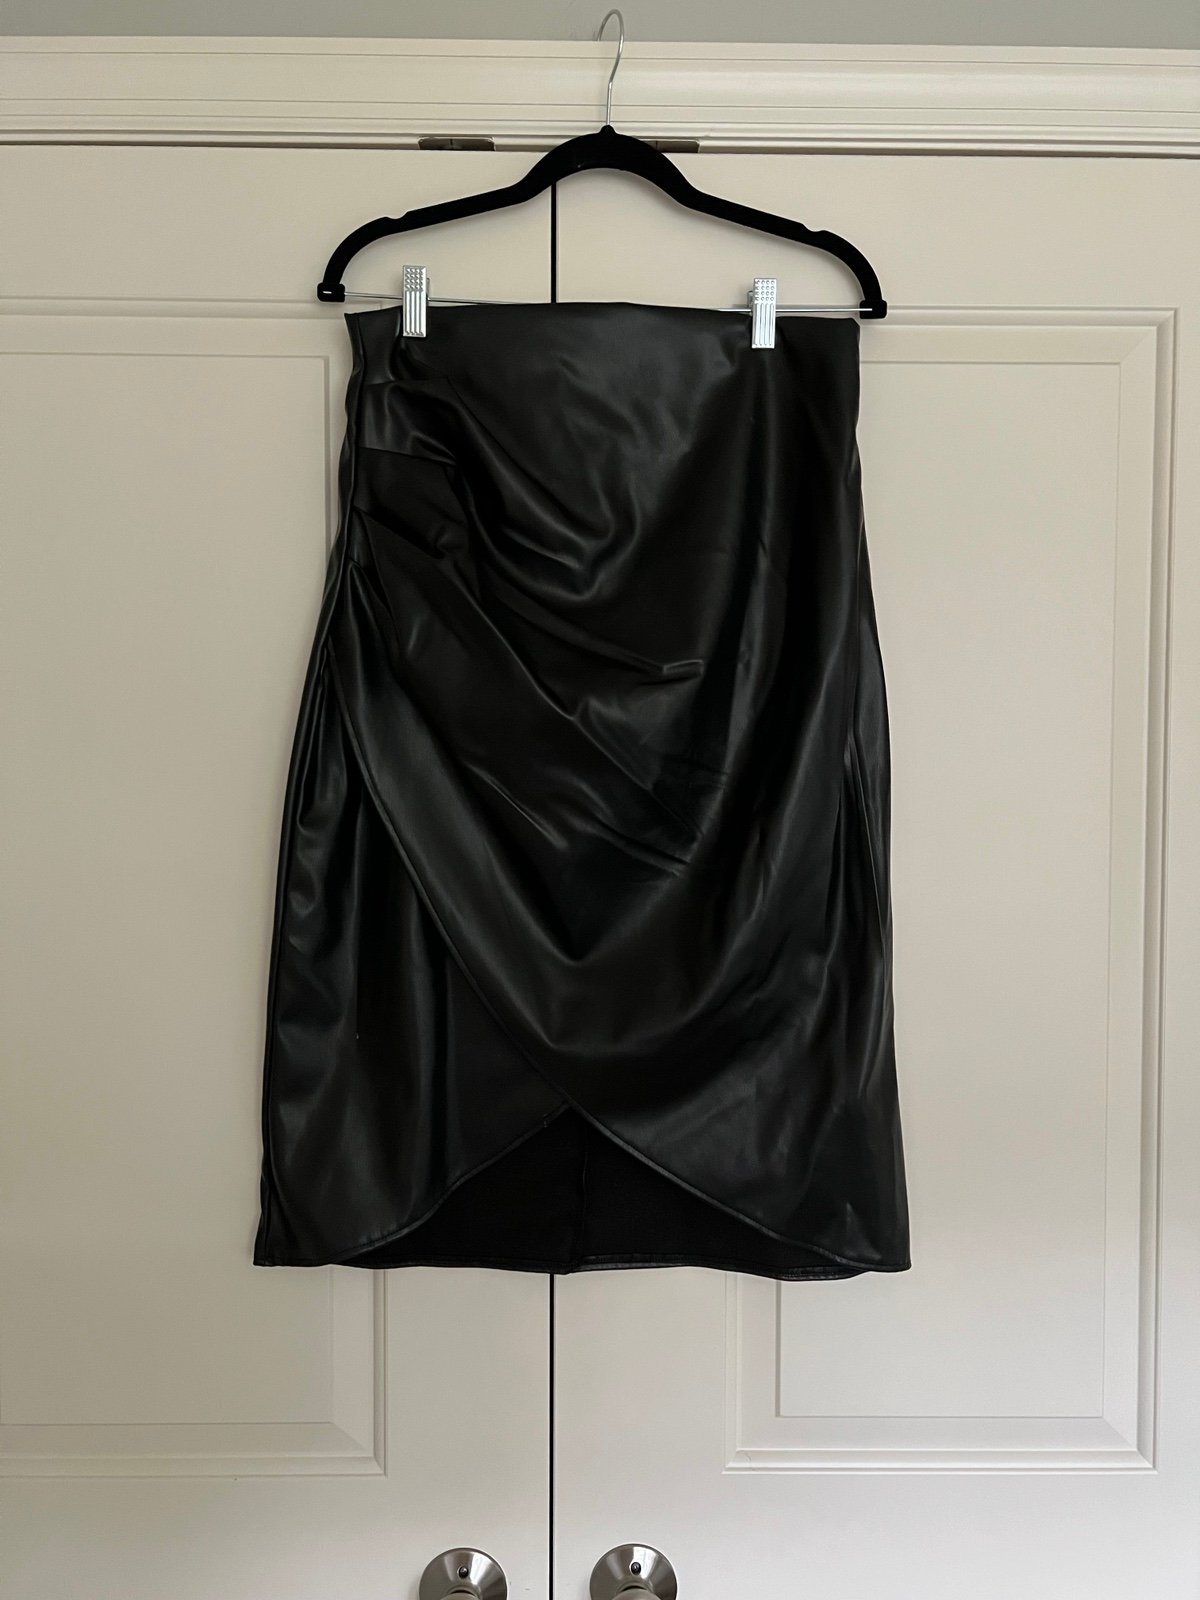 cheapest place to buy  Black vegan leather midi skirt p7j1awJVa Outlet Store